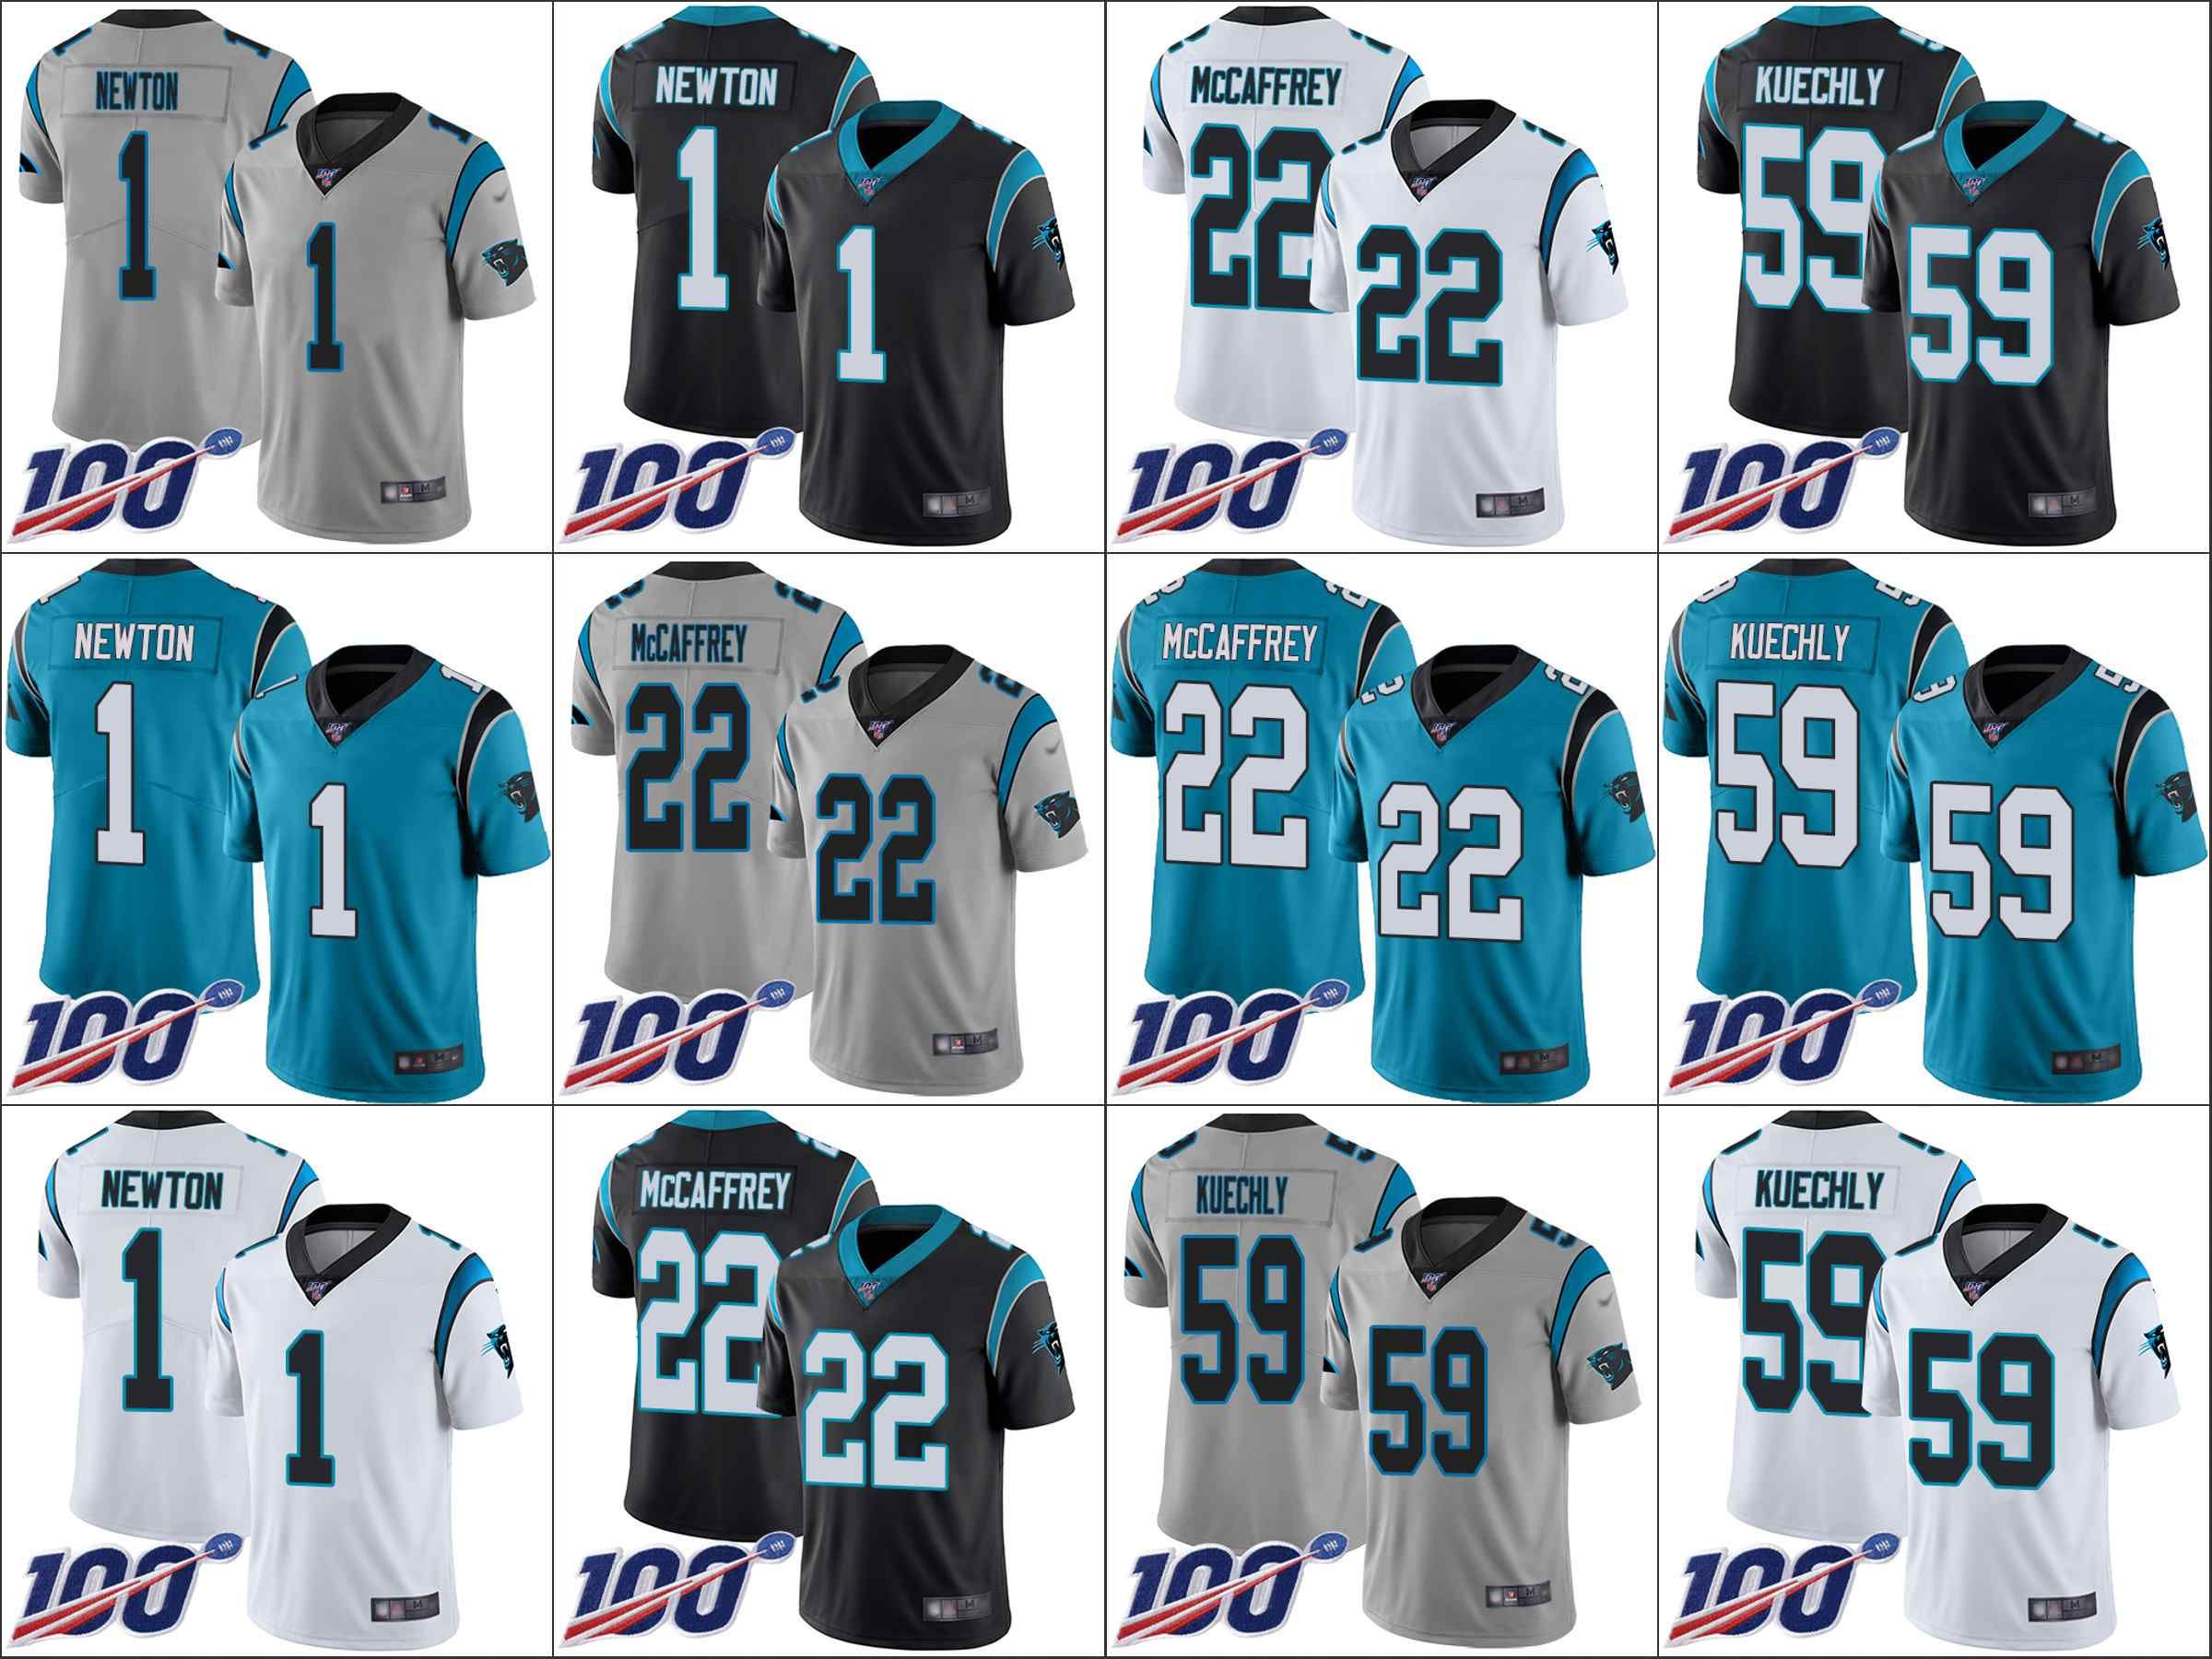 cam newton youth jersey sale